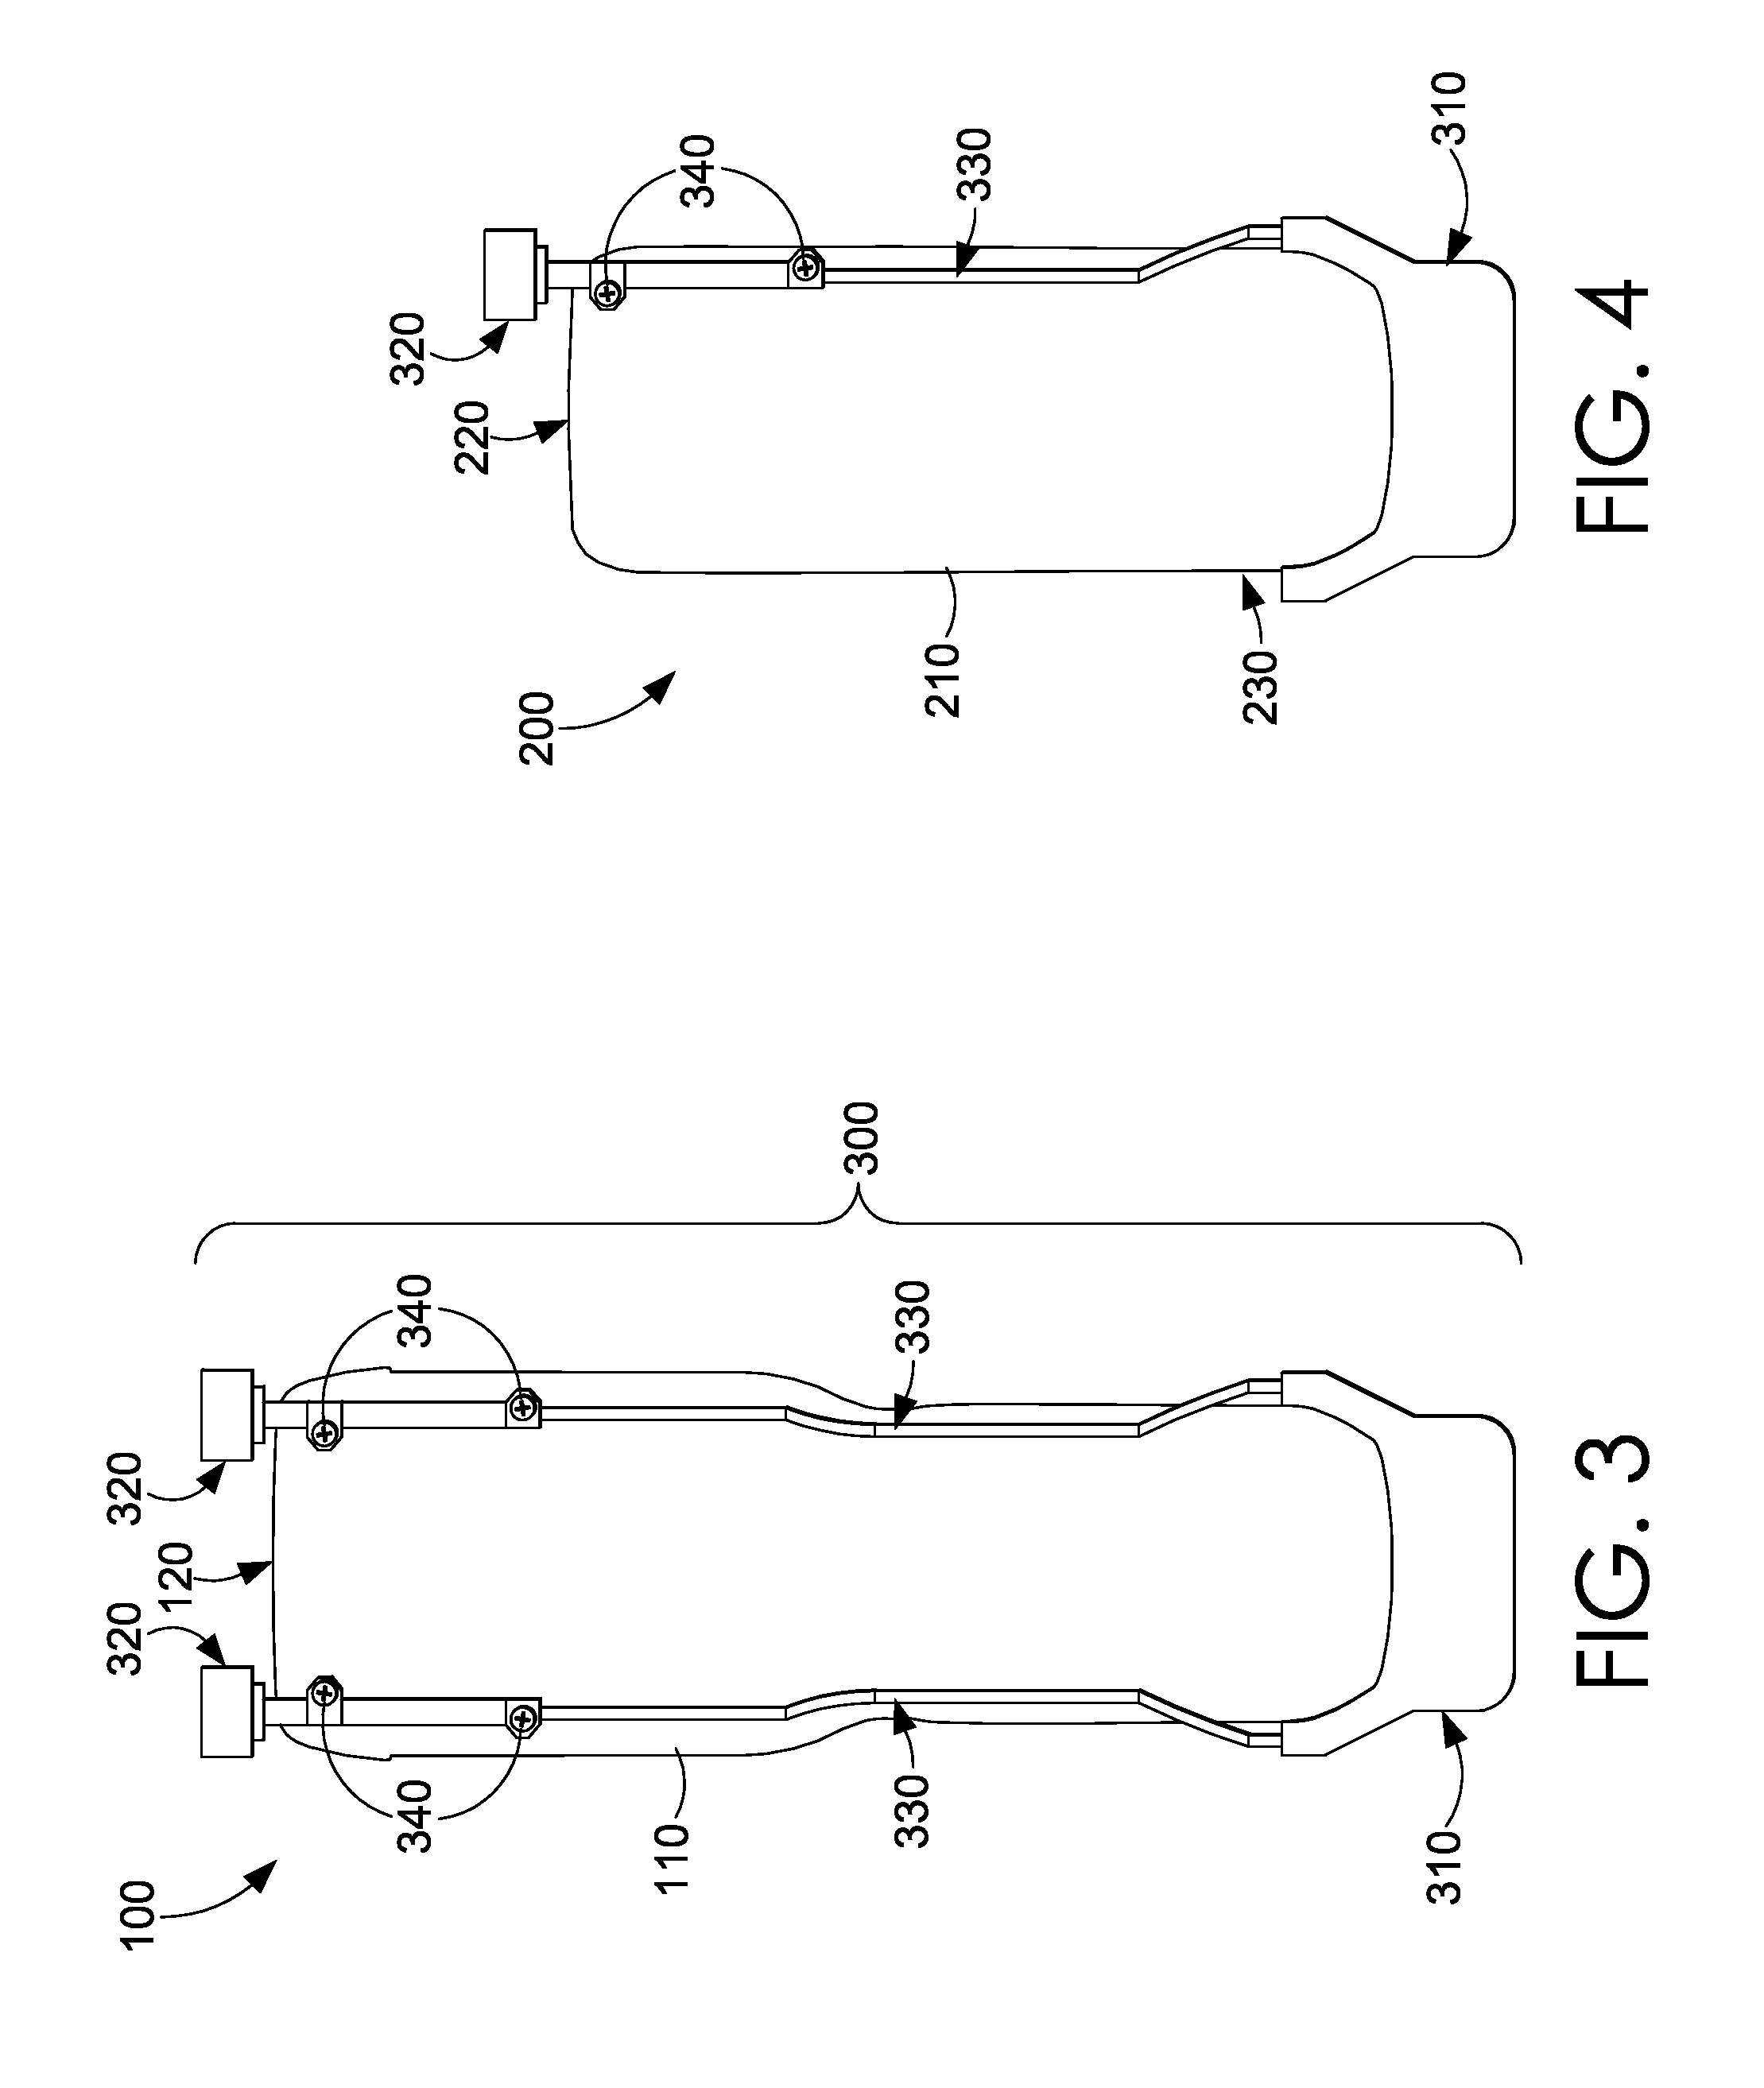 Snap-on module for selectively installing receiving element(s) to a mobile device